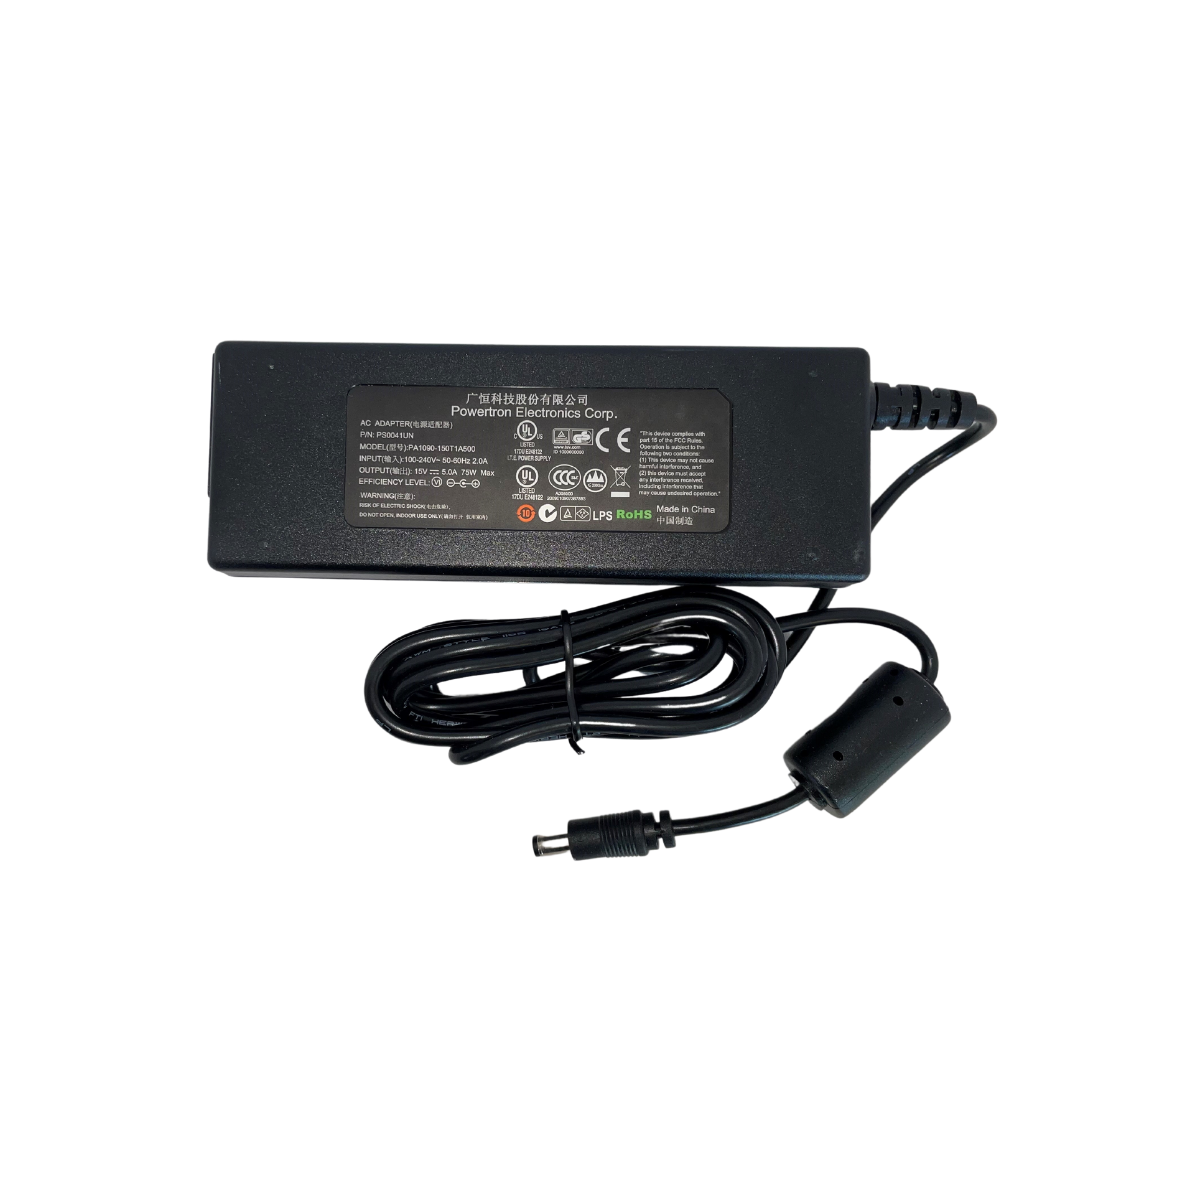 RTS PS-800-NM4 Power Supply